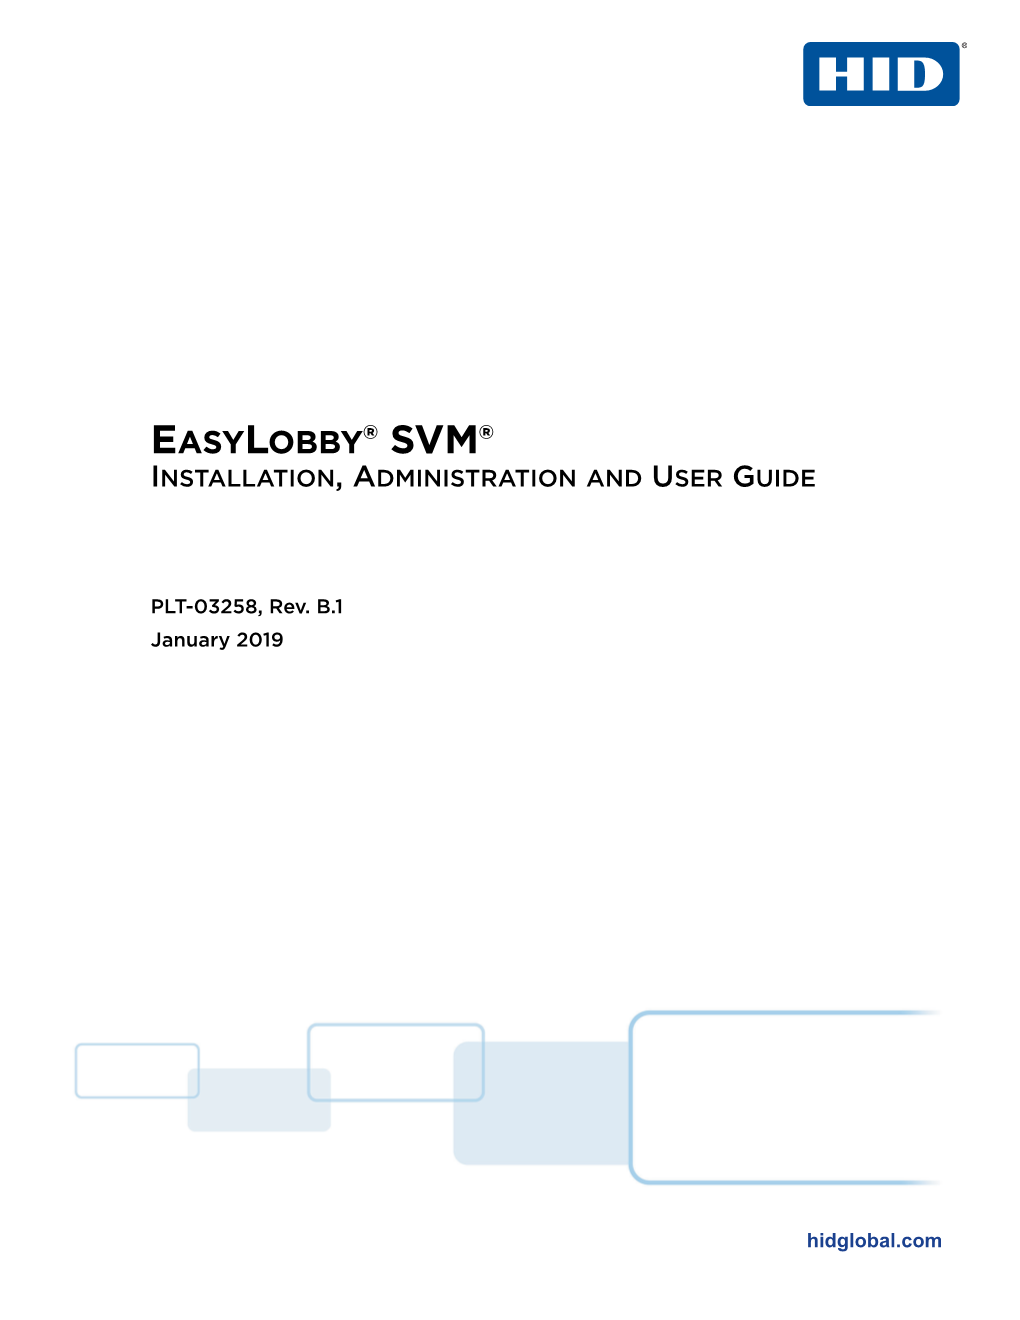 Easylobby® Svm® Installation, Administration and User Guide